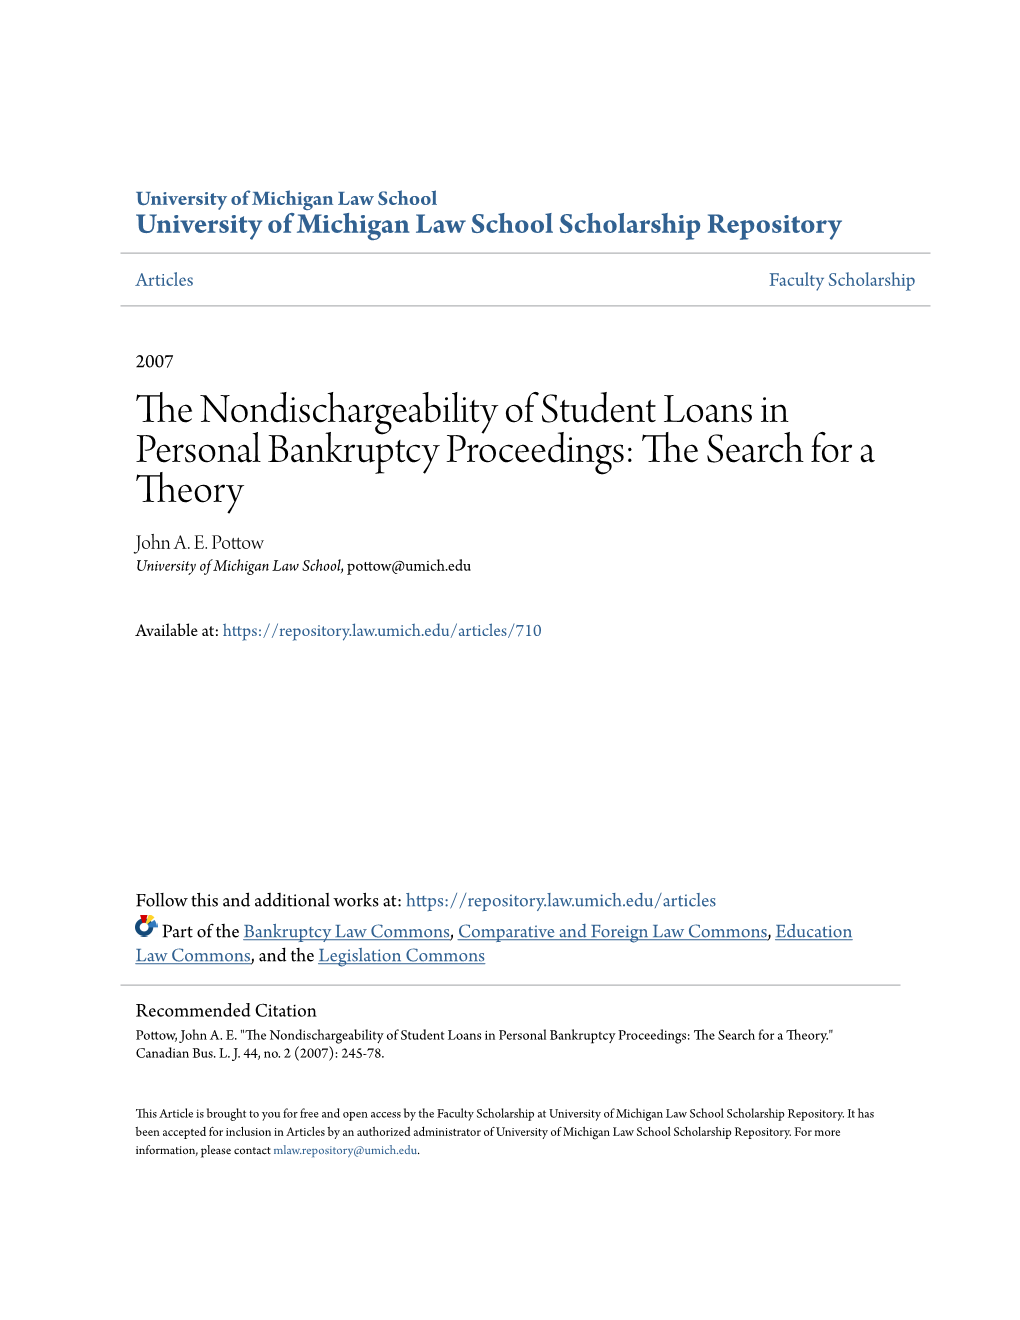 The Nondischargeability of Student Loans in Personal Bankruptcy Proceedings: the Search for a Theory